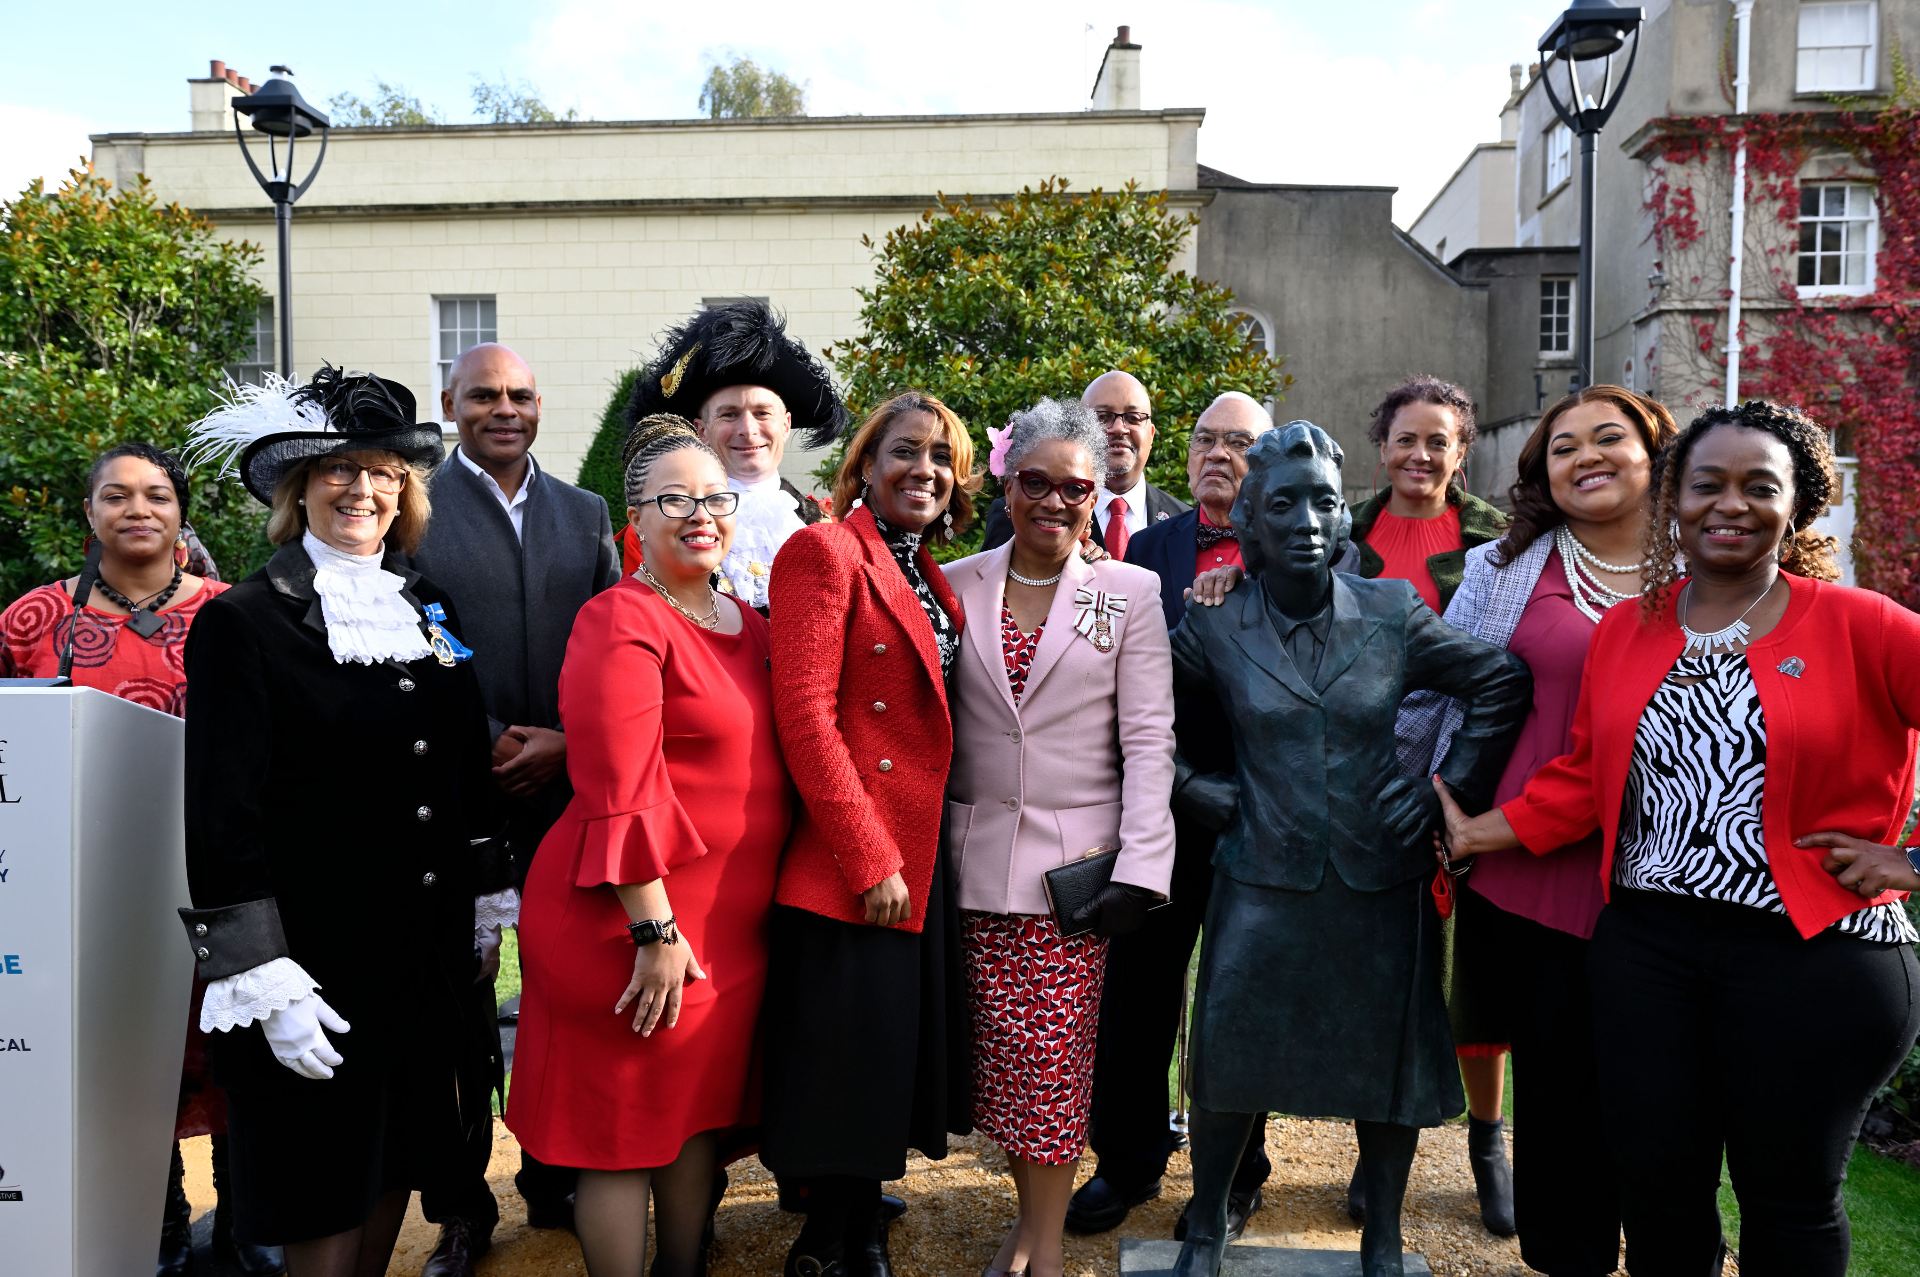 Members of the Lacks Family, artist Helen Wilson-Roe, Lord Lieutenant of Bristol Peaches Golding, Bristol High Sheriff Susan Davies, Lord Mayor of Bristol Steve Smith, Mayor of Bristol Marvin Rees and former Lord Mayor of Bristol Cleo Lake at the statue unveiling